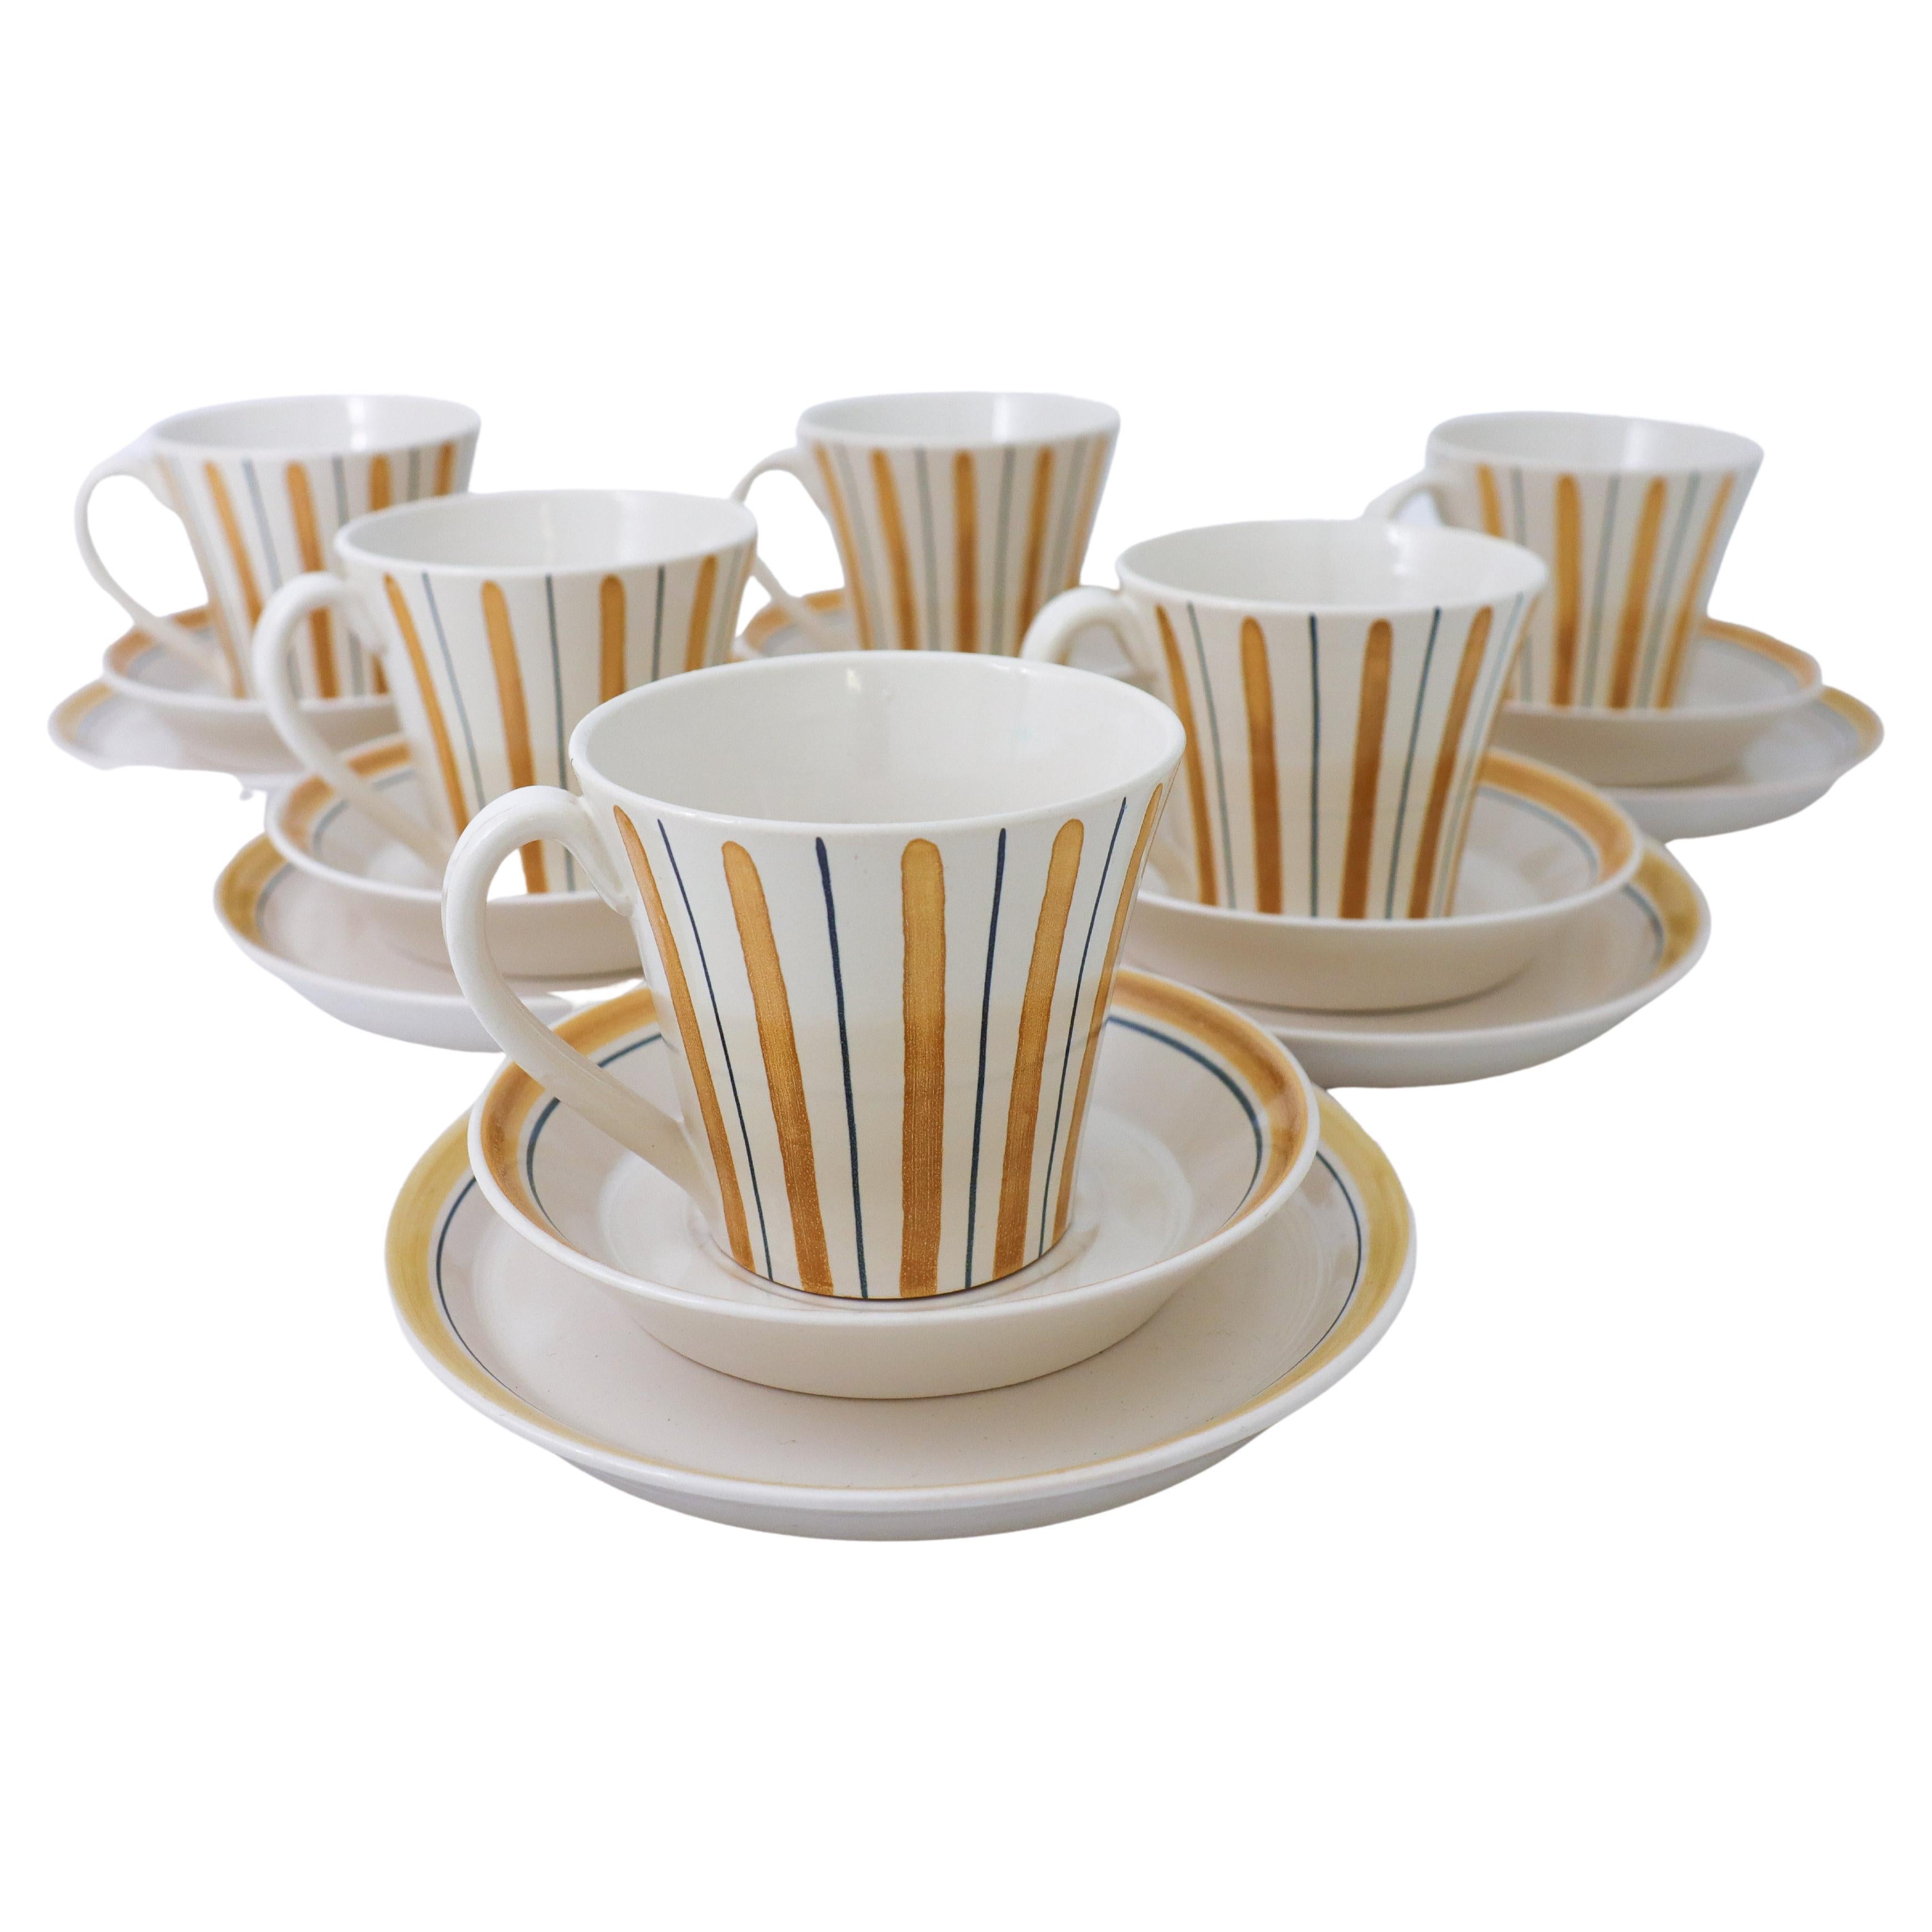 6 Sets of Tea Cups with Saucers & Plates, "Lilja" "Lilly", Bo Fajans, Sweden For Sale